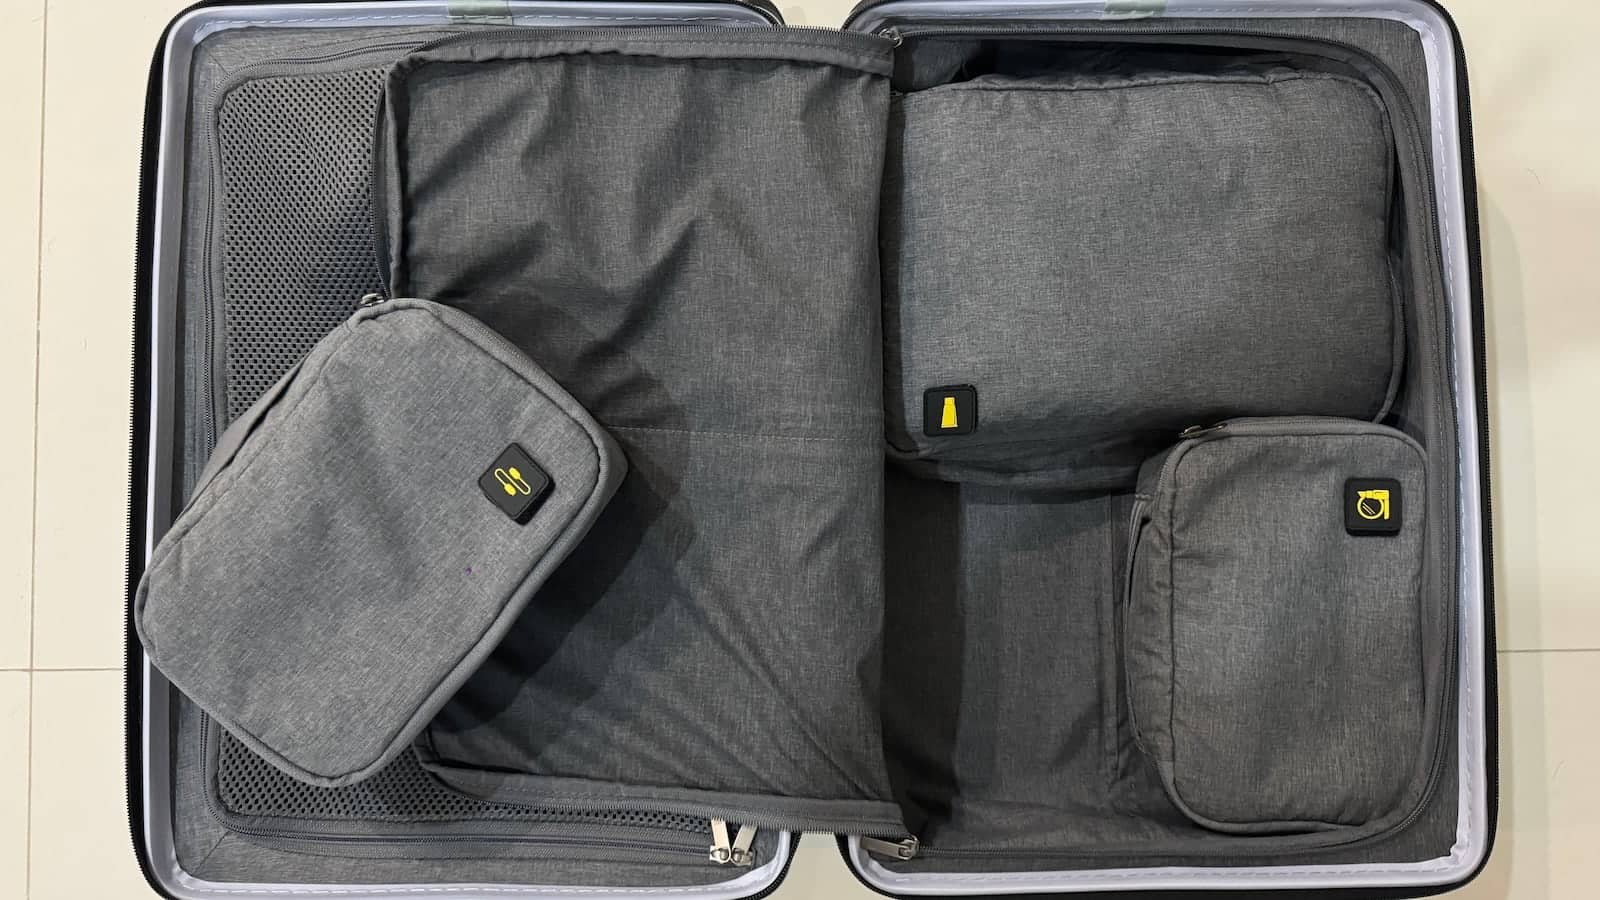 Packing cubes organised inside suitcase.